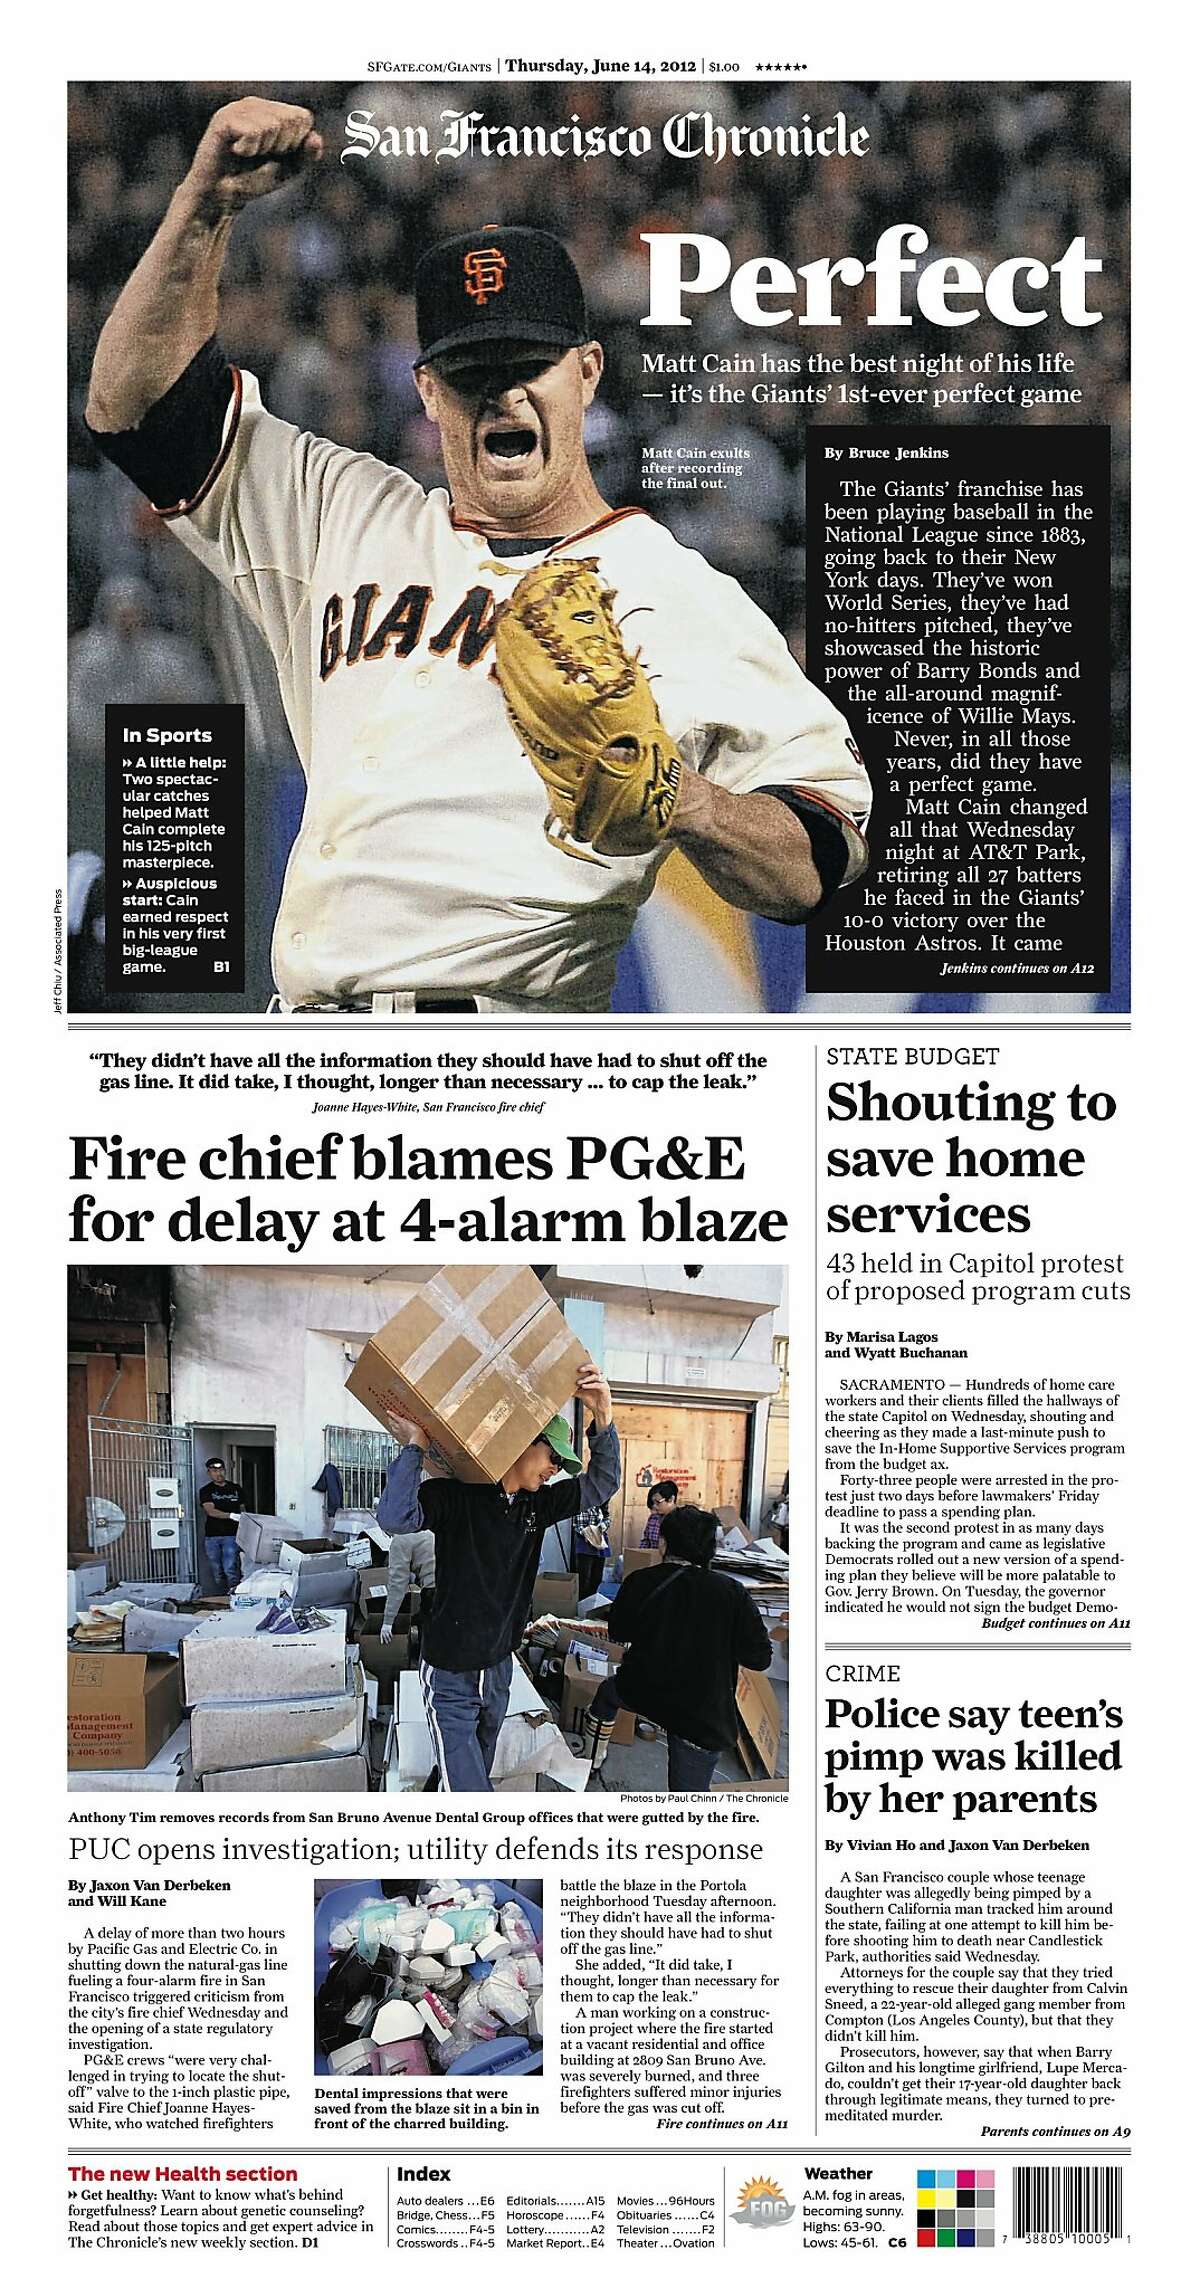 Chronicle Covers: Matt Cain's perfect night at AT&T Park